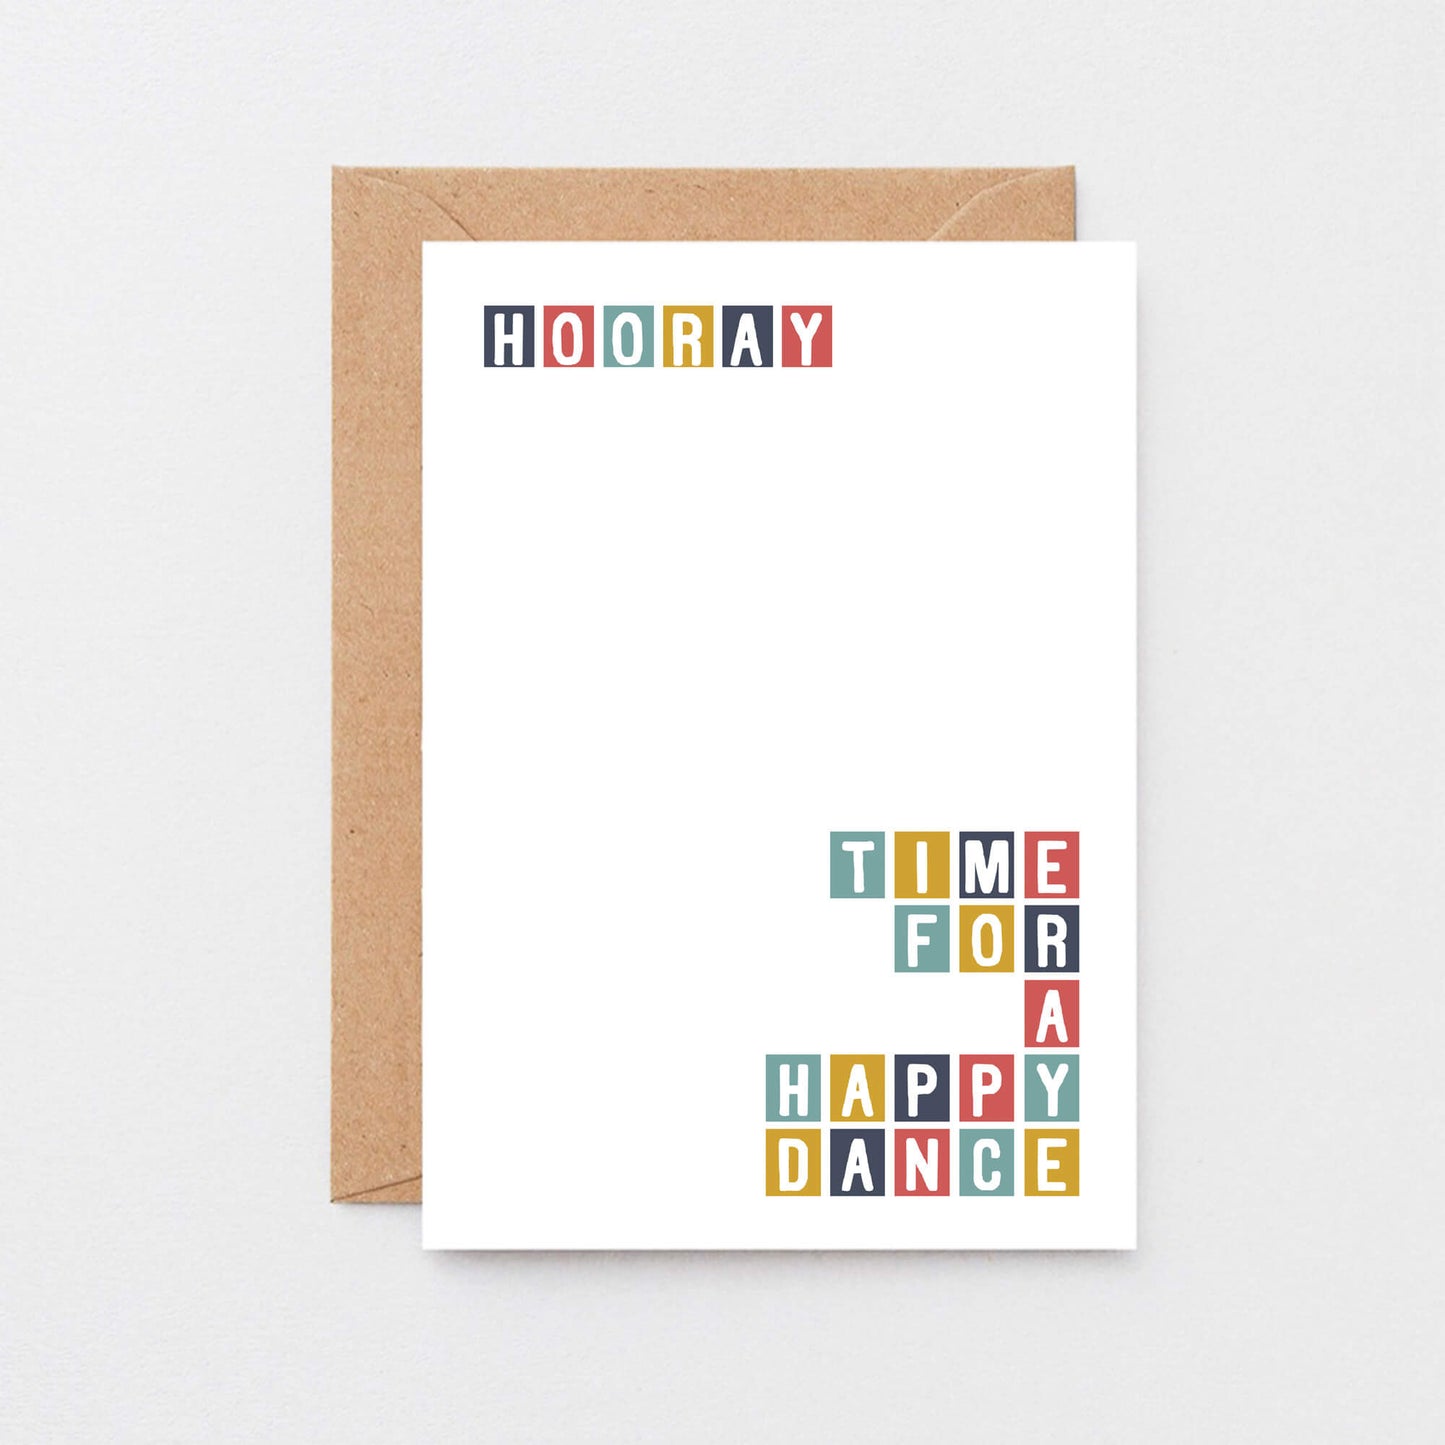 Congratulations Card by SixElevenCreations. Reads Hooray Time for a happy dance. Product Code SE0321A6